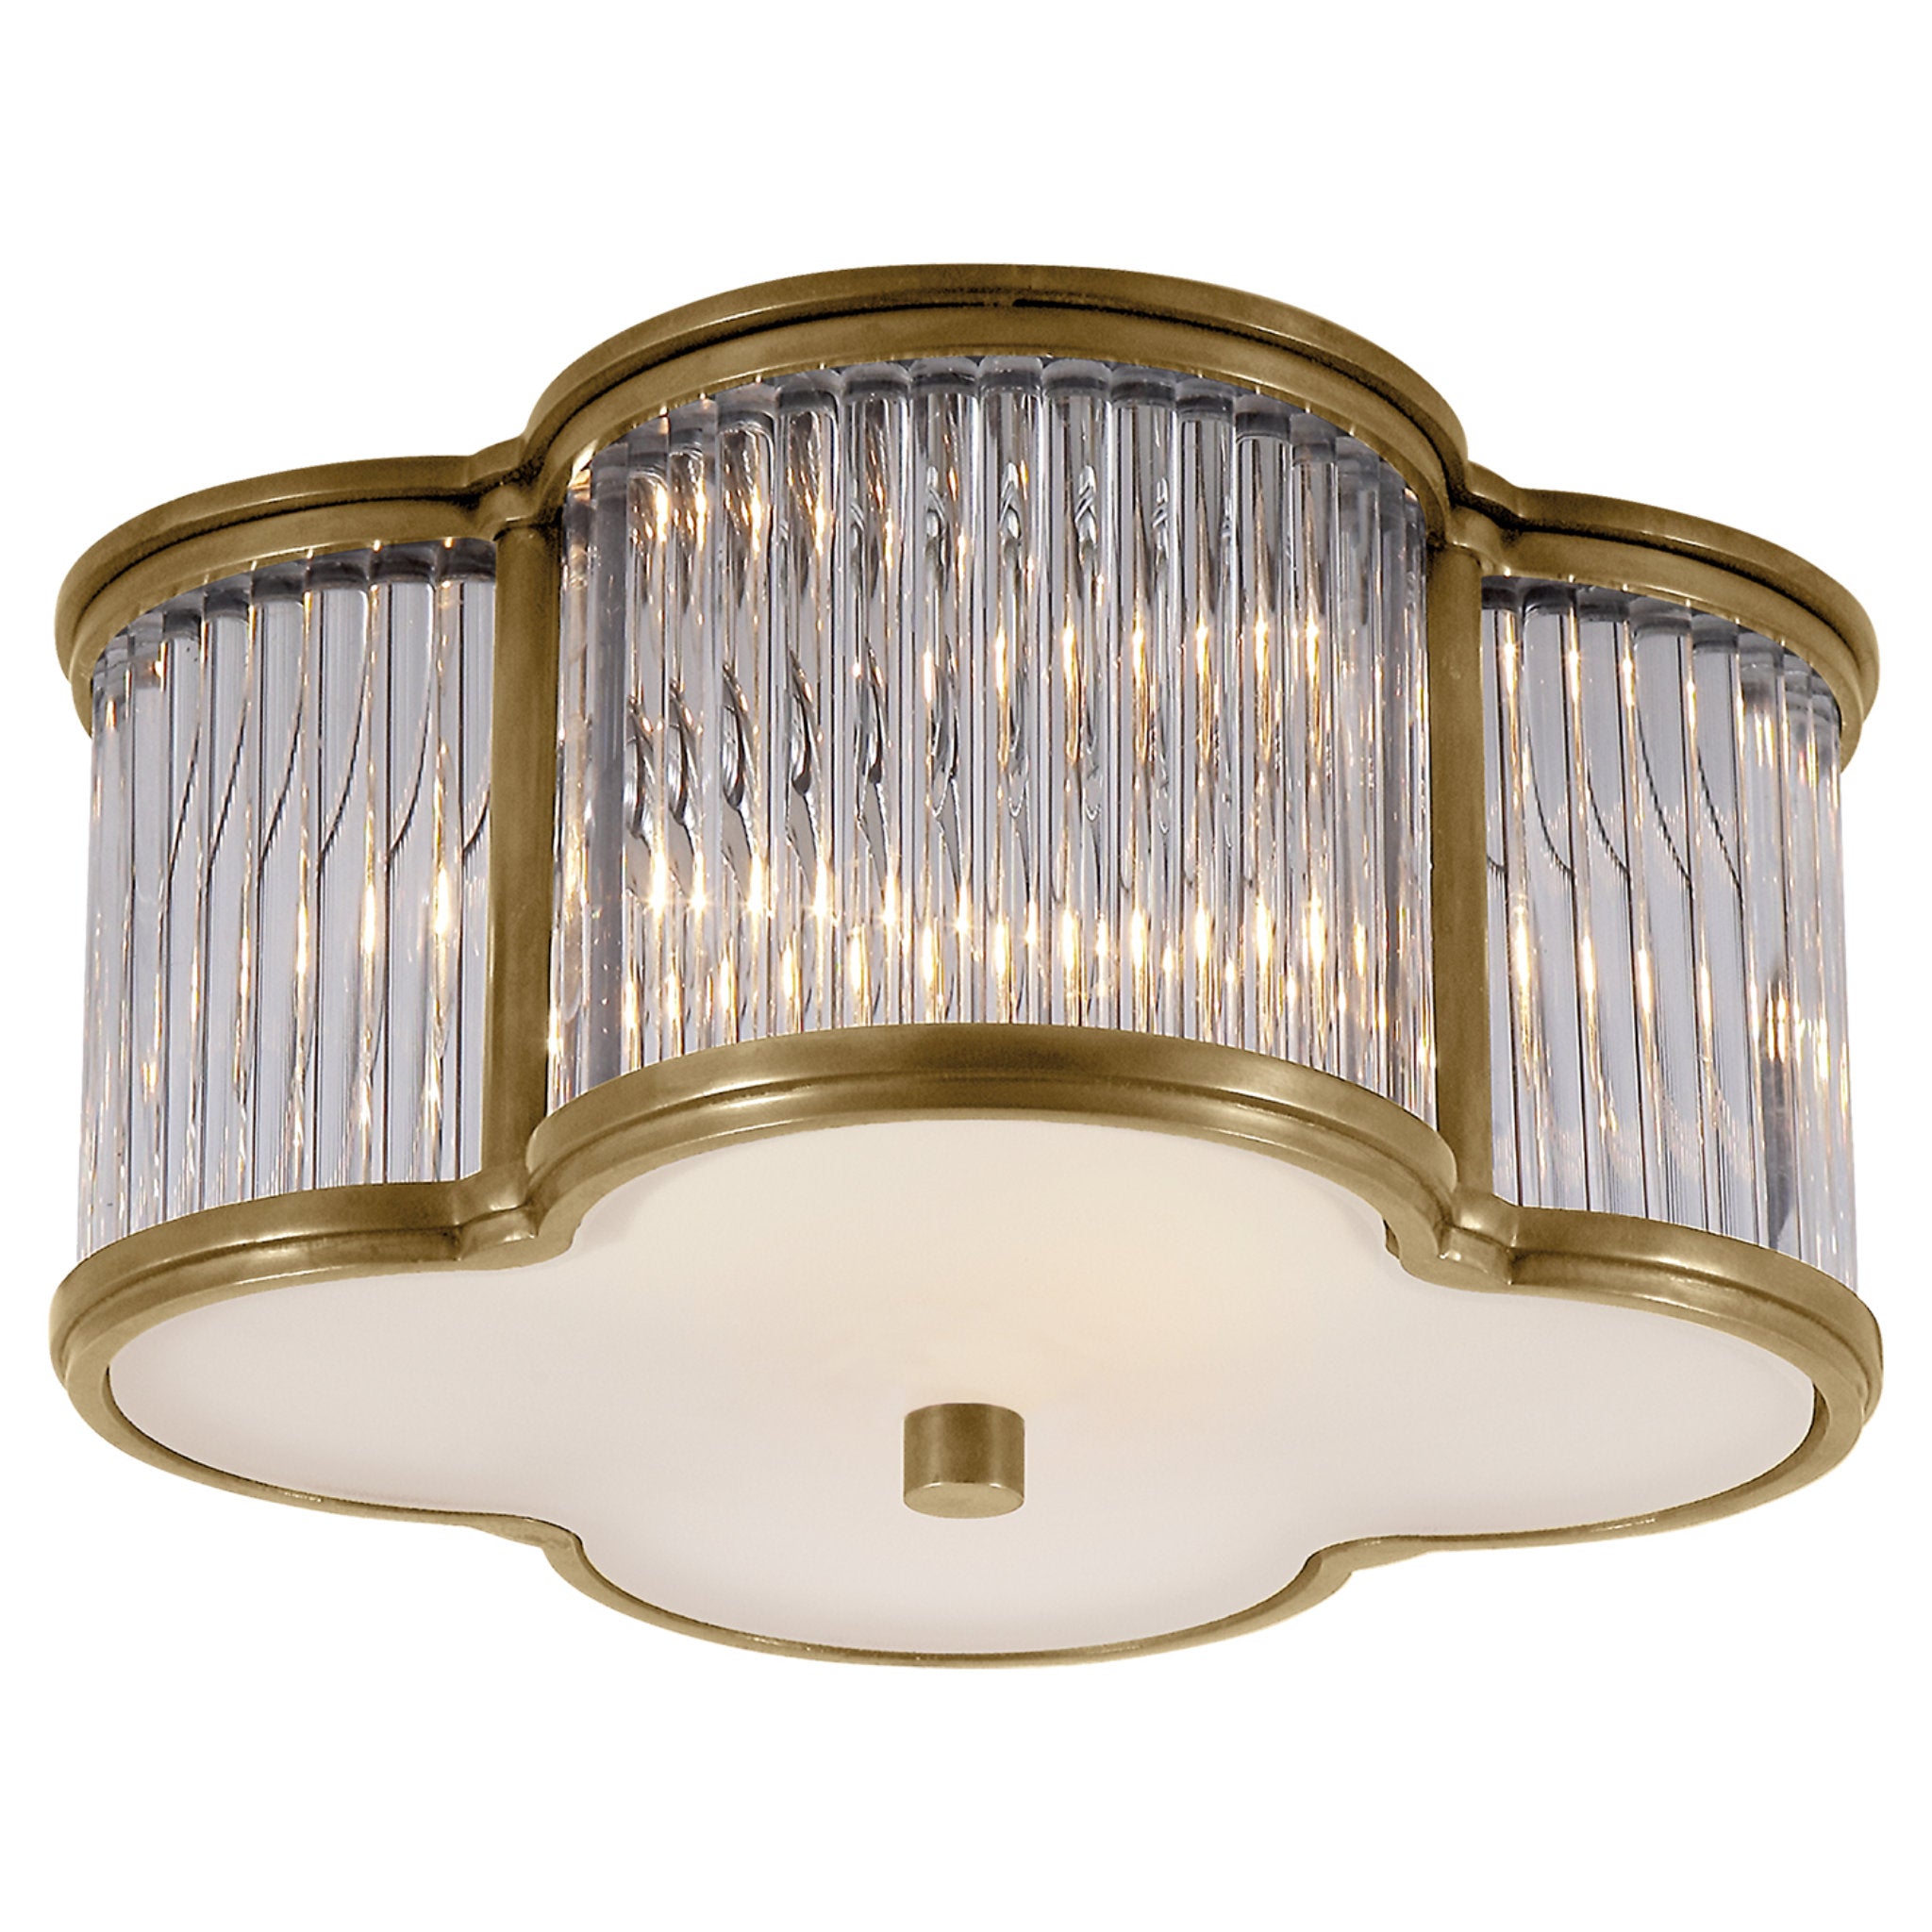 Alexa Hampton Basil Small Flush Mount in Natural Brass and Clear Glass Rods with Frosted Glass